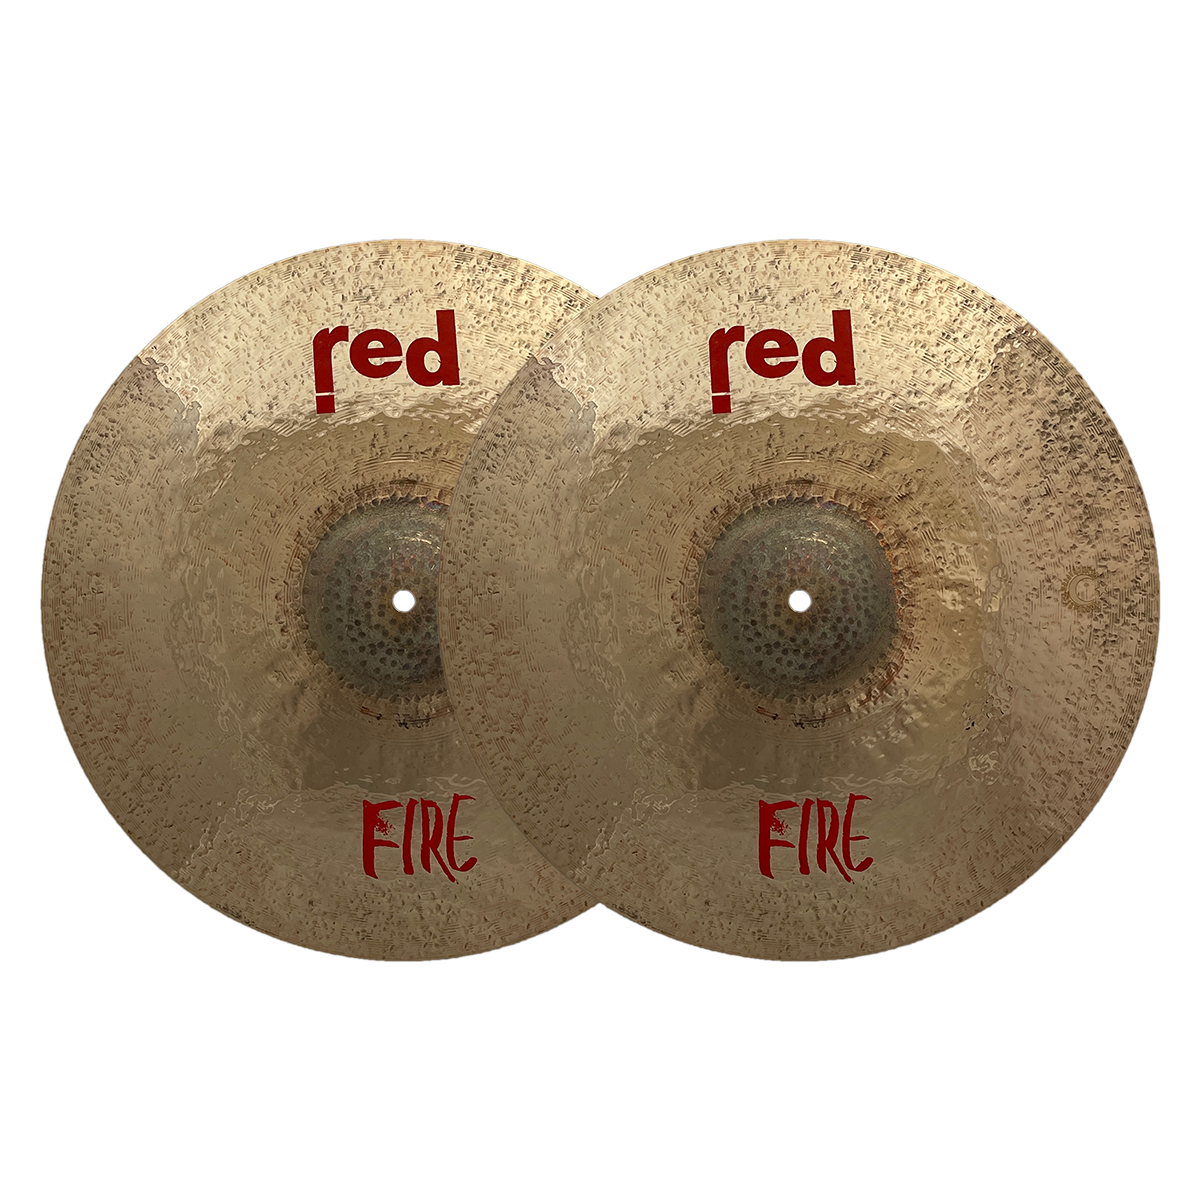 Red Cymbals Fire Series Hi-hat Cymbals